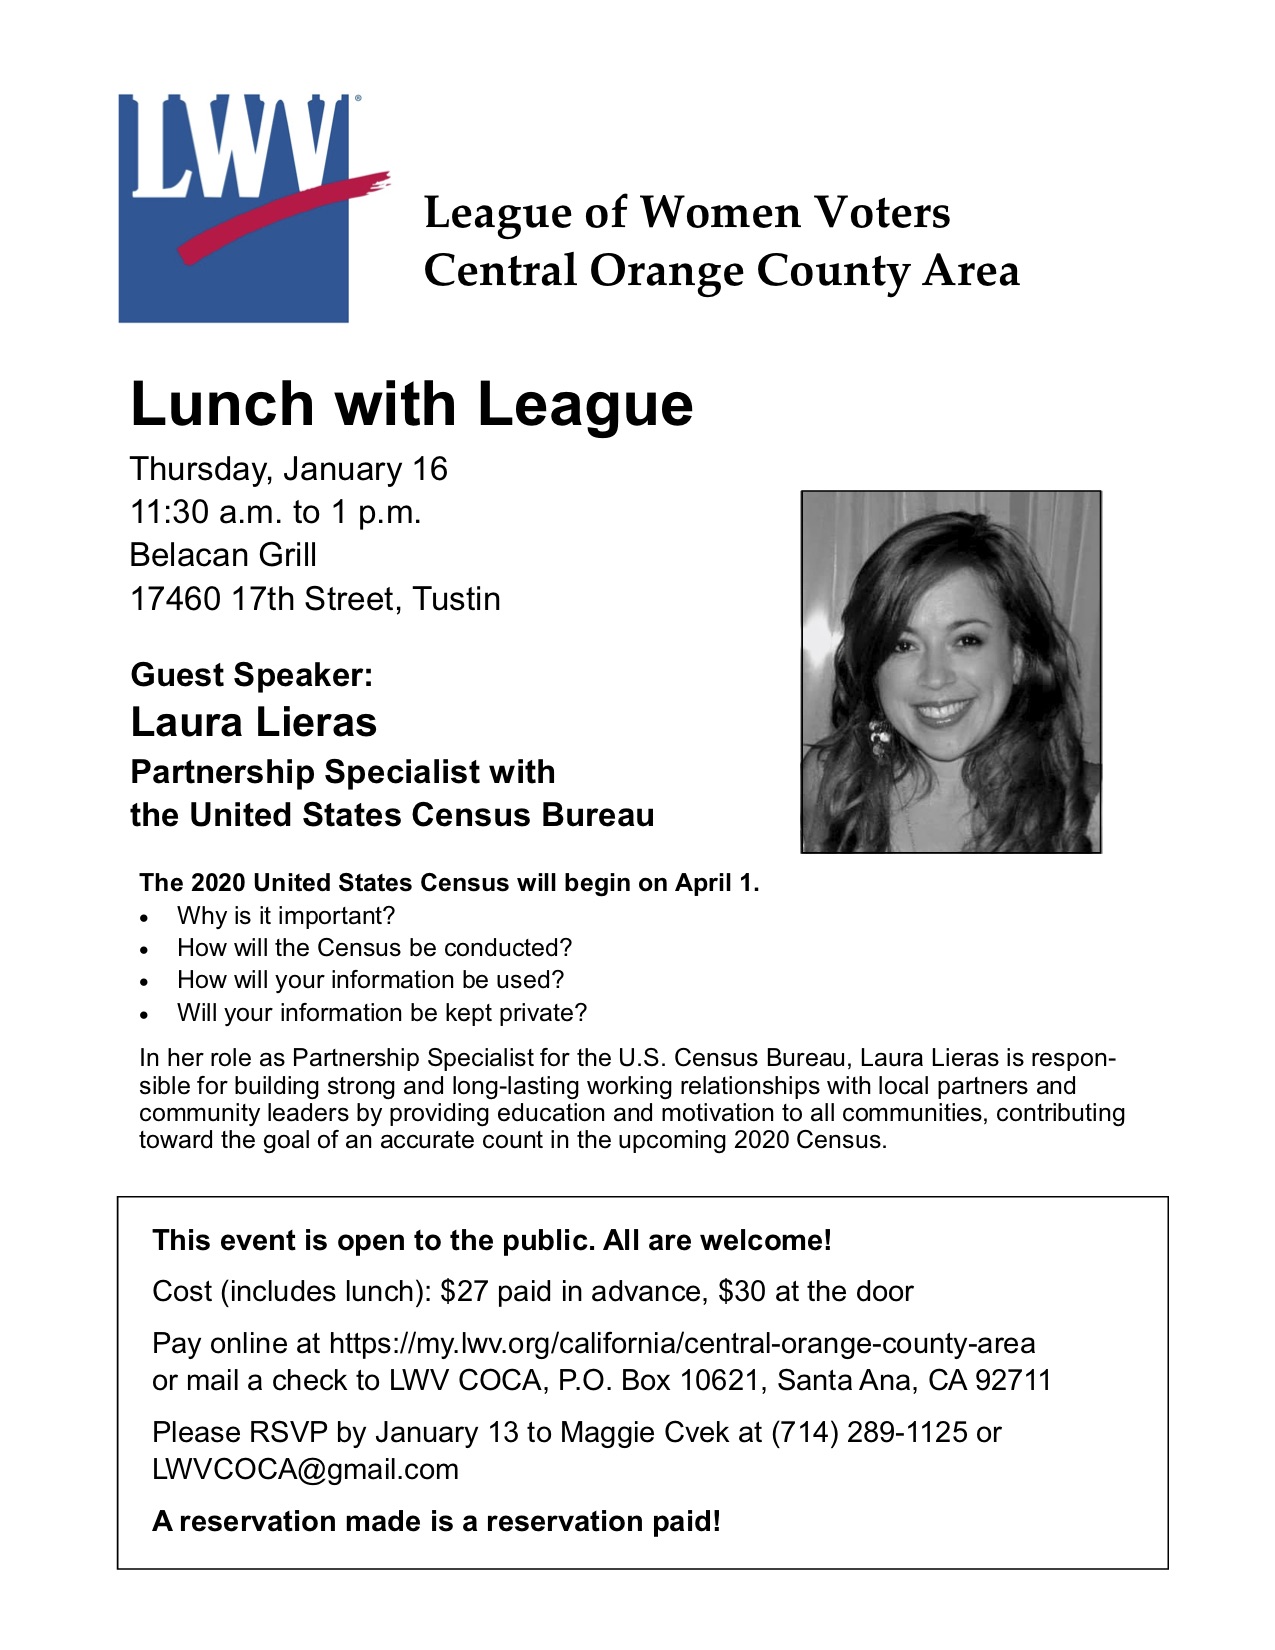 Lunch with League Census 2020 Laura Lieras speaker